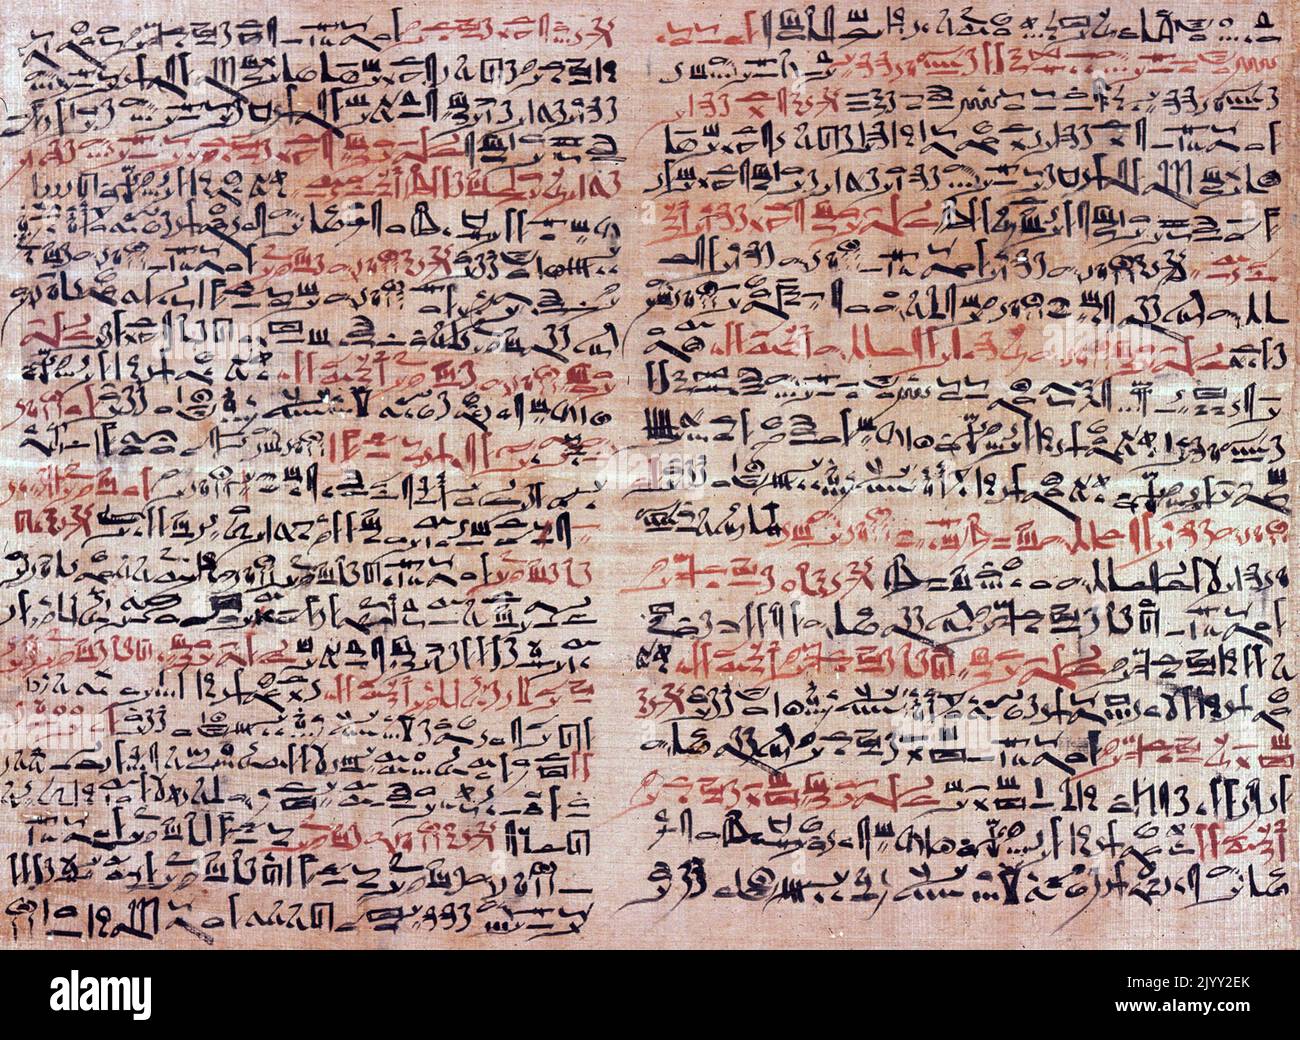 The Edwin Smith Papyrus is an ancient Egyptian medical text, named after the dealer who bought it in 1862, and the oldest known surgical treatise, on trauma. This document, which may have been a manual of military surgery, describes 48 cases of injuries, fractures, wounds, dislocations and tumors. It dates to Dynasties 16-17 of the Second Intermediate Period in ancient Egypt, c. 1600 BC. Stock Photo